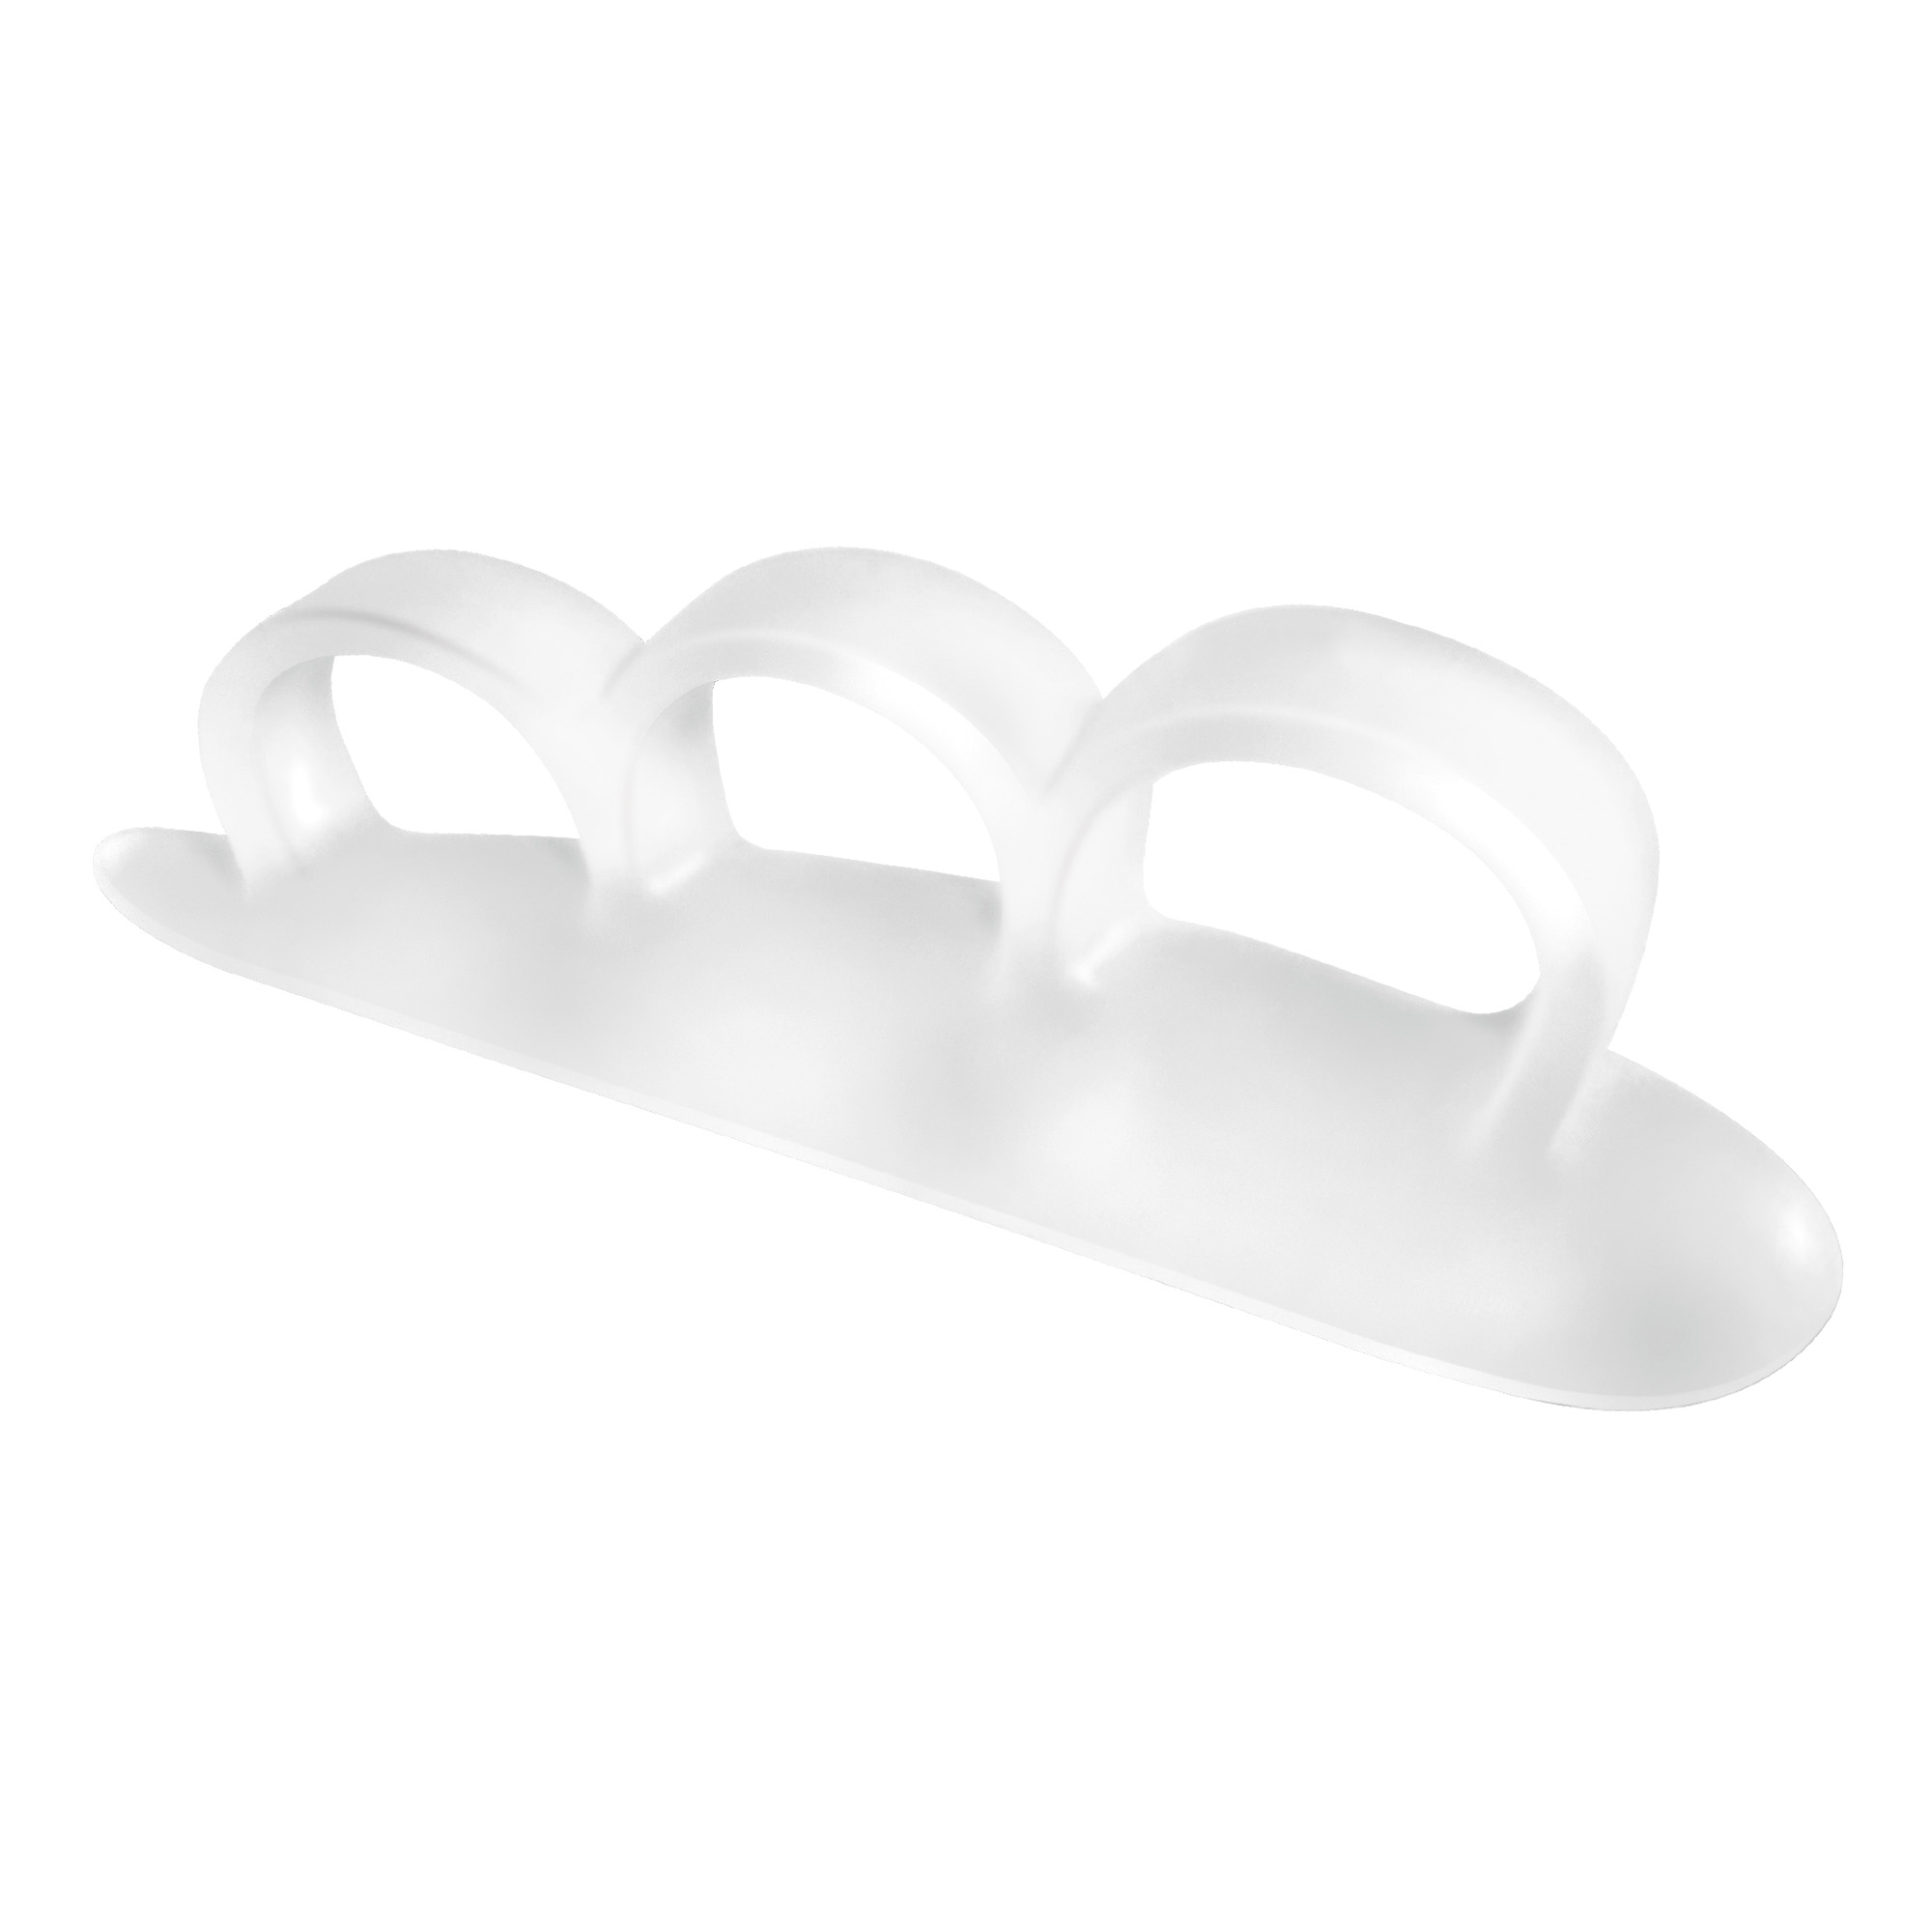 Gel cushion with toe rings - size Medium/Large for left foot 1 pc